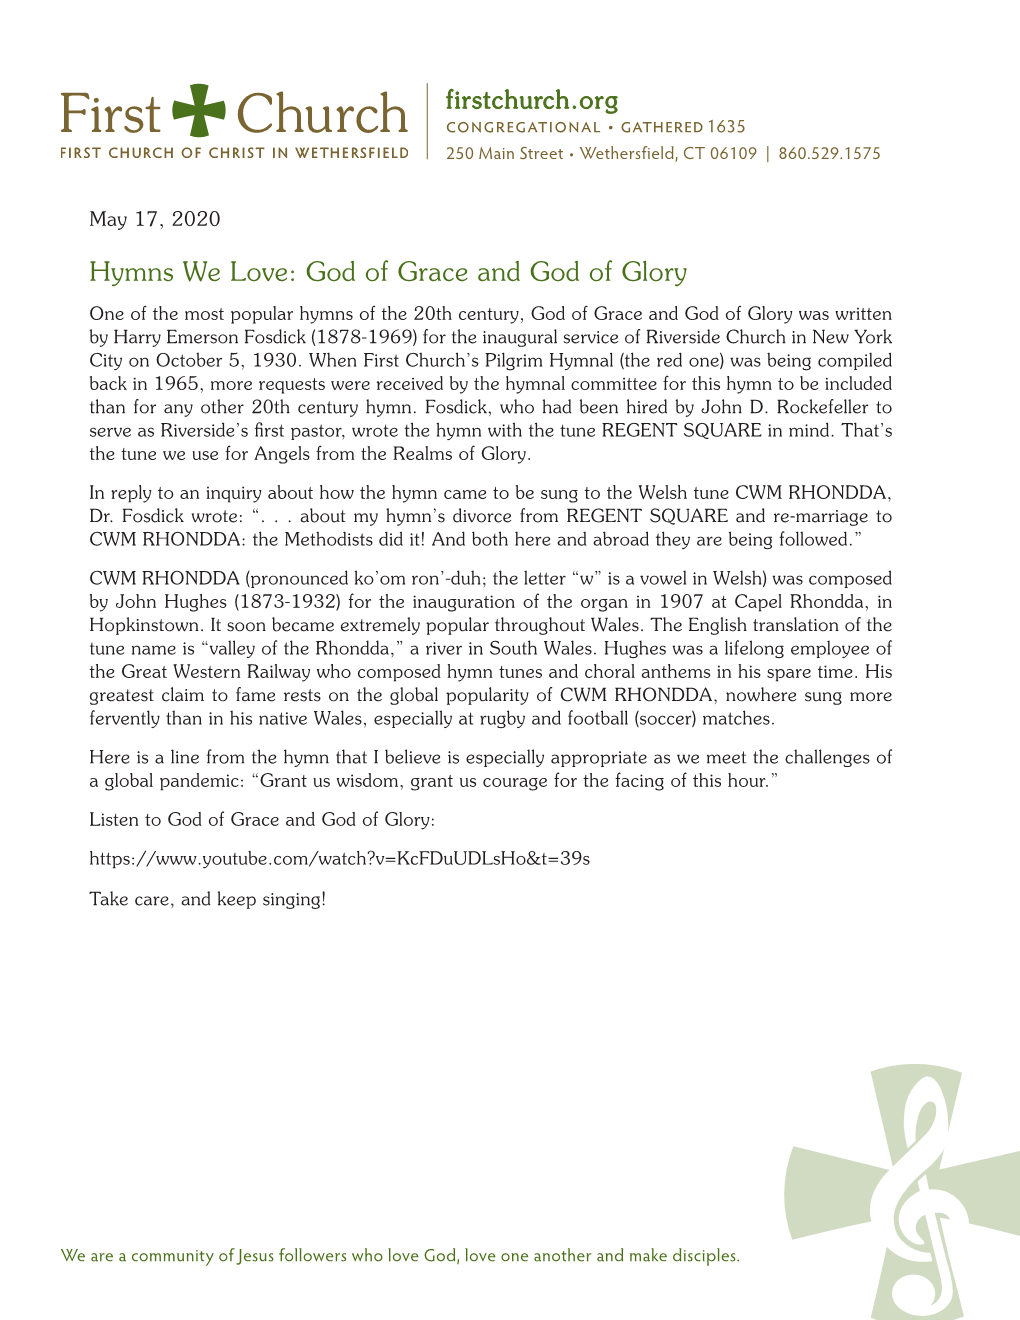 Hymns We Love: God of Grace and God of Glory